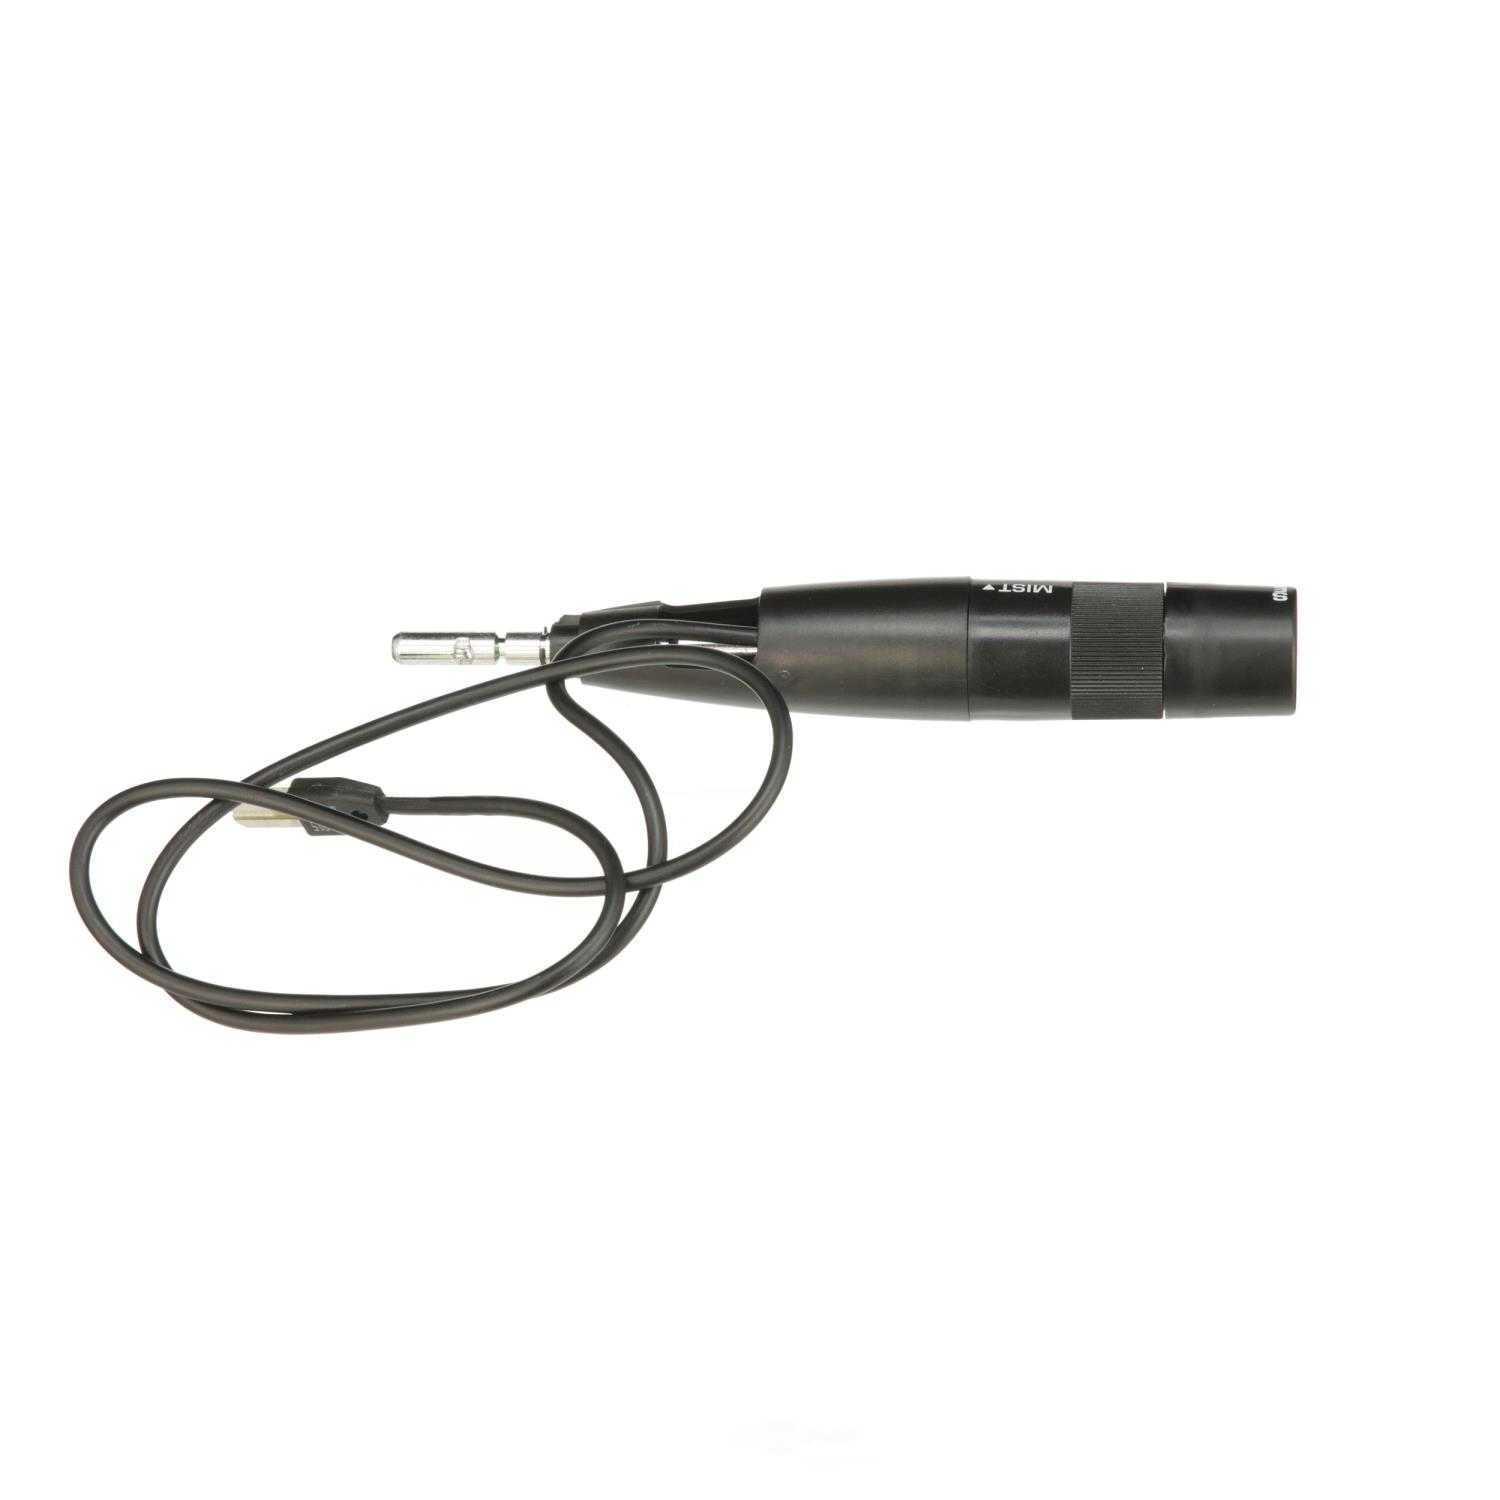 STANDARD MOTOR PRODUCTS - Windshield Wiper Switch - STA DS-1534